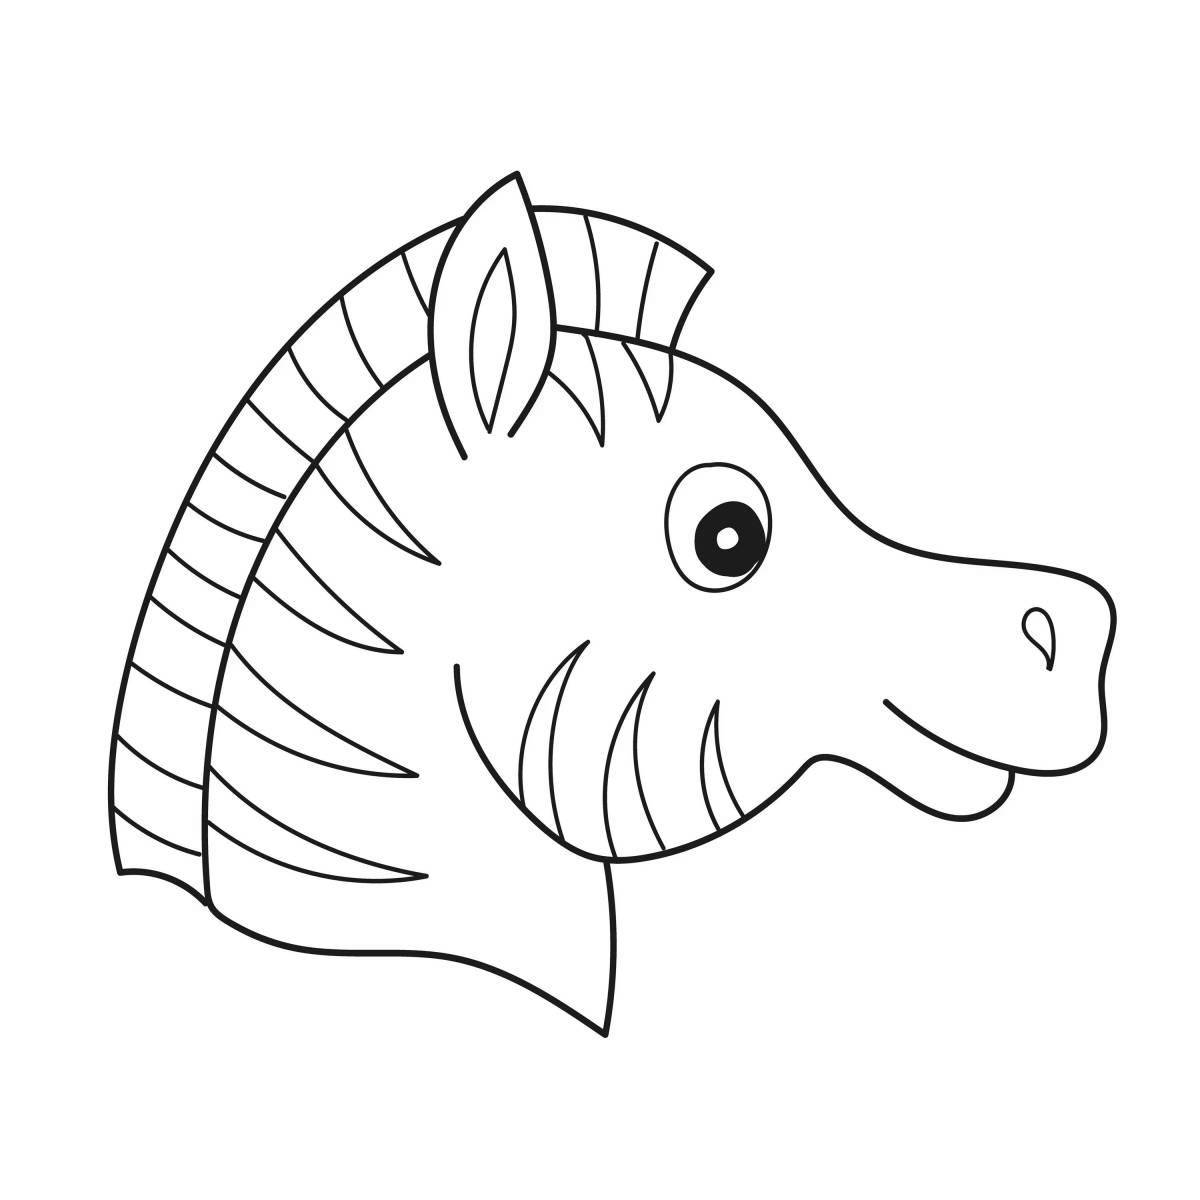 Amazing zebra coloring book for kids